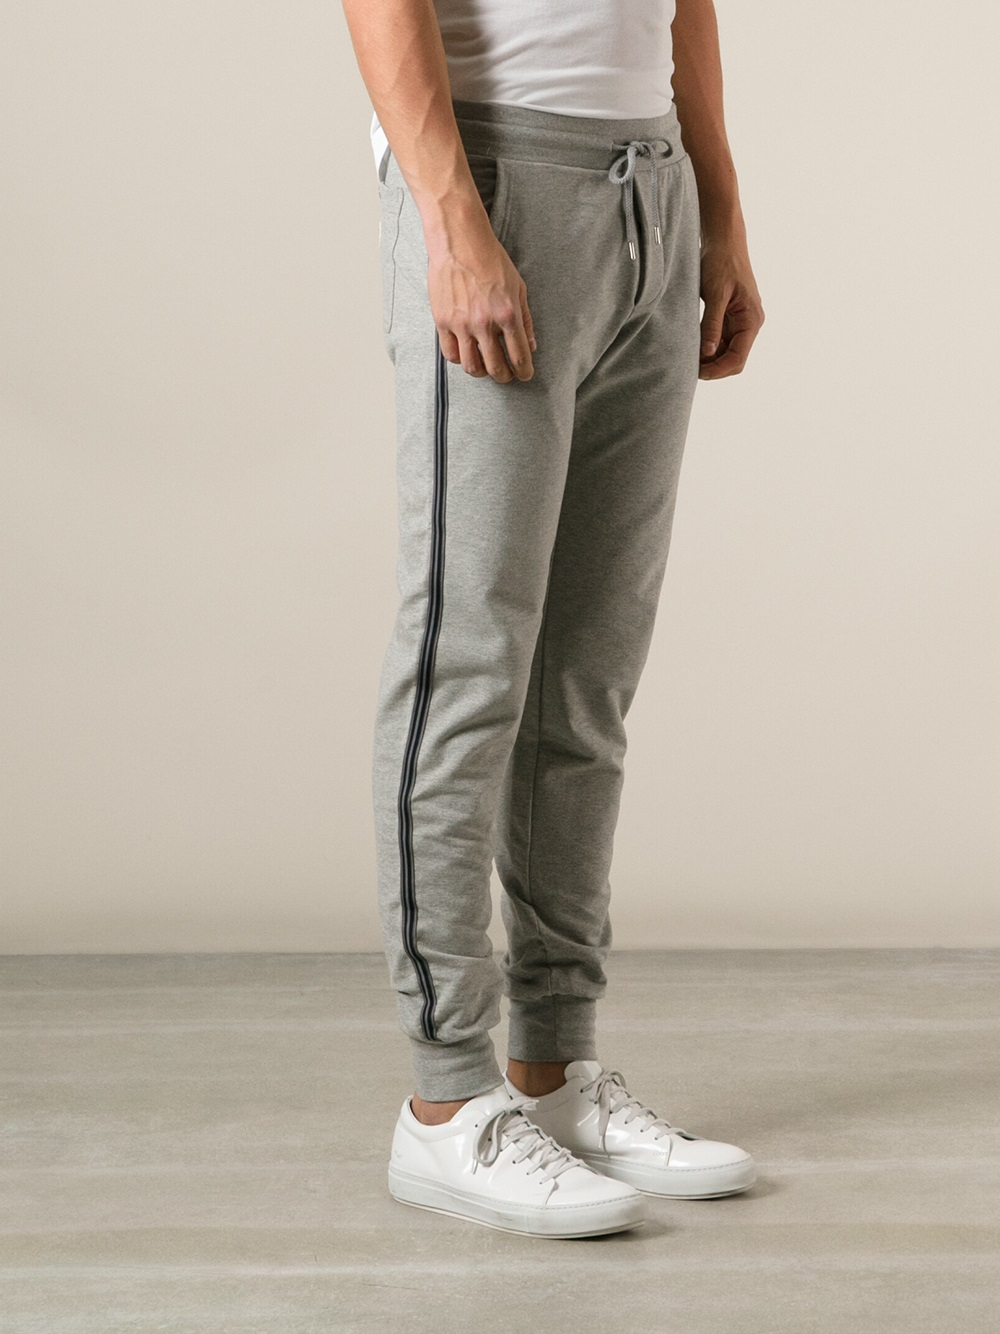 Moncler Track Pants in Grey (Gray) for Men - Lyst